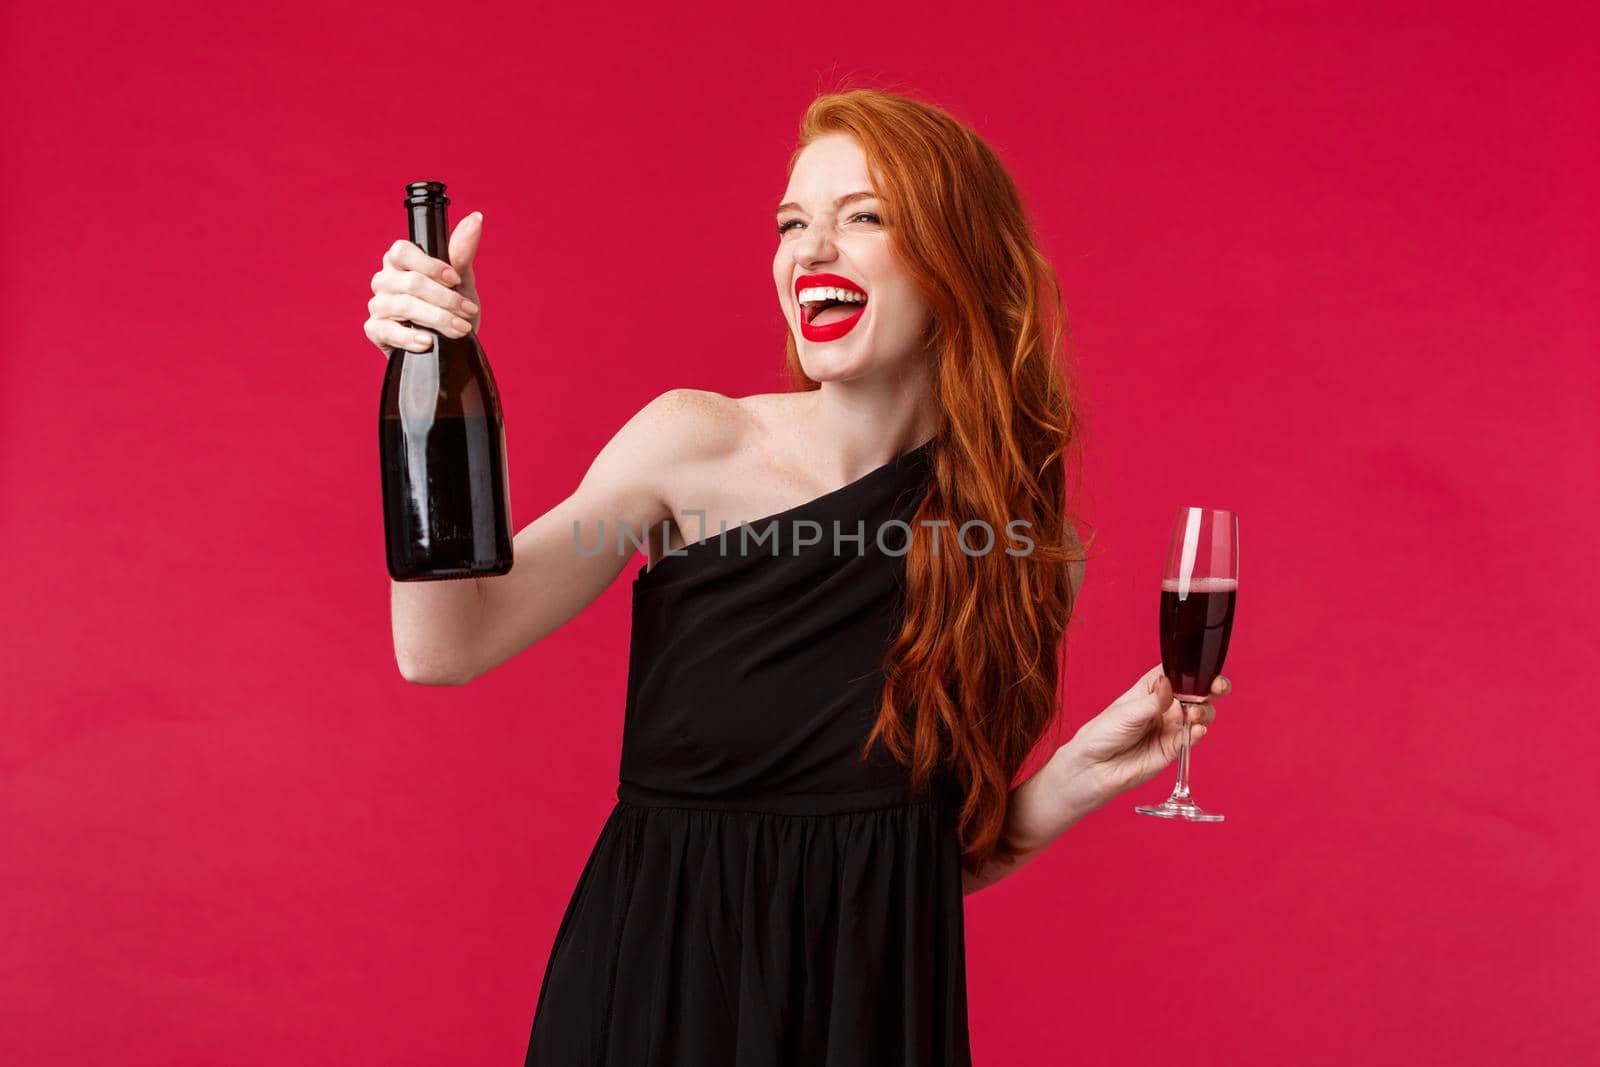 Carefree excited beautiful redhead woman celebrating night out with girlfriends, partying on birthday or holiday, holding bottle champagne saying cheers drink from glass, look away satisfied.